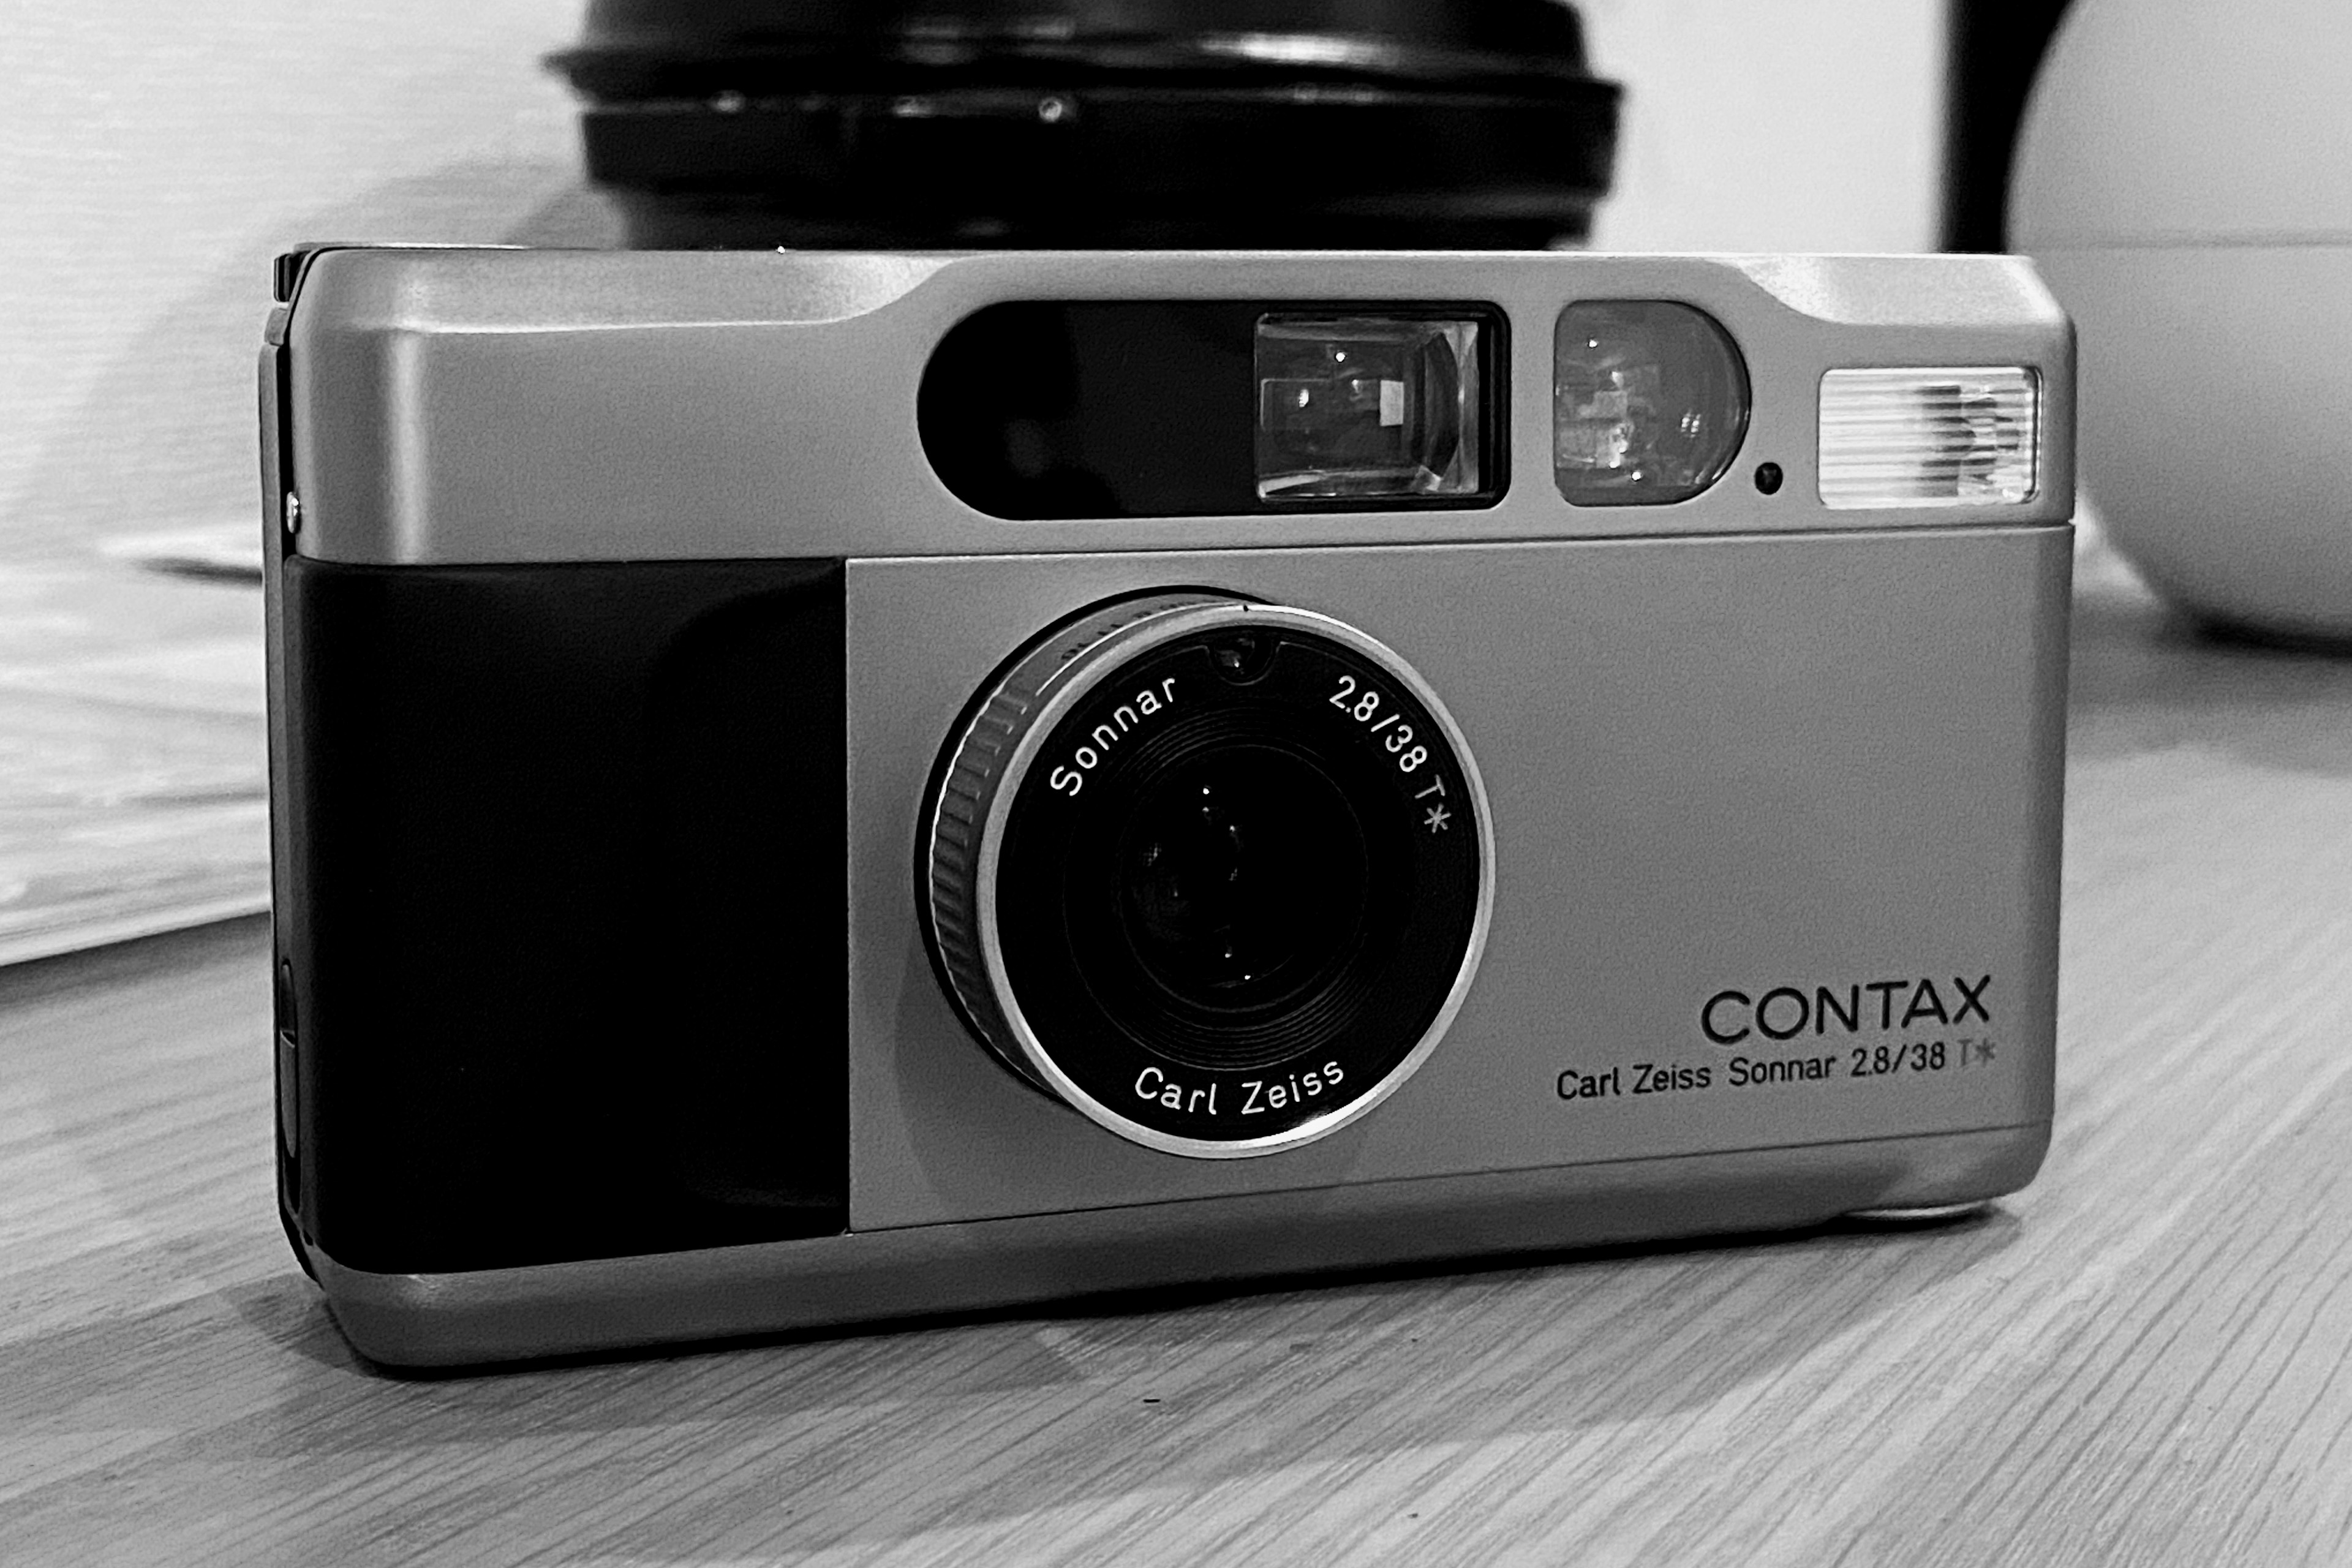 I purchased a Contax T2 film camera today.